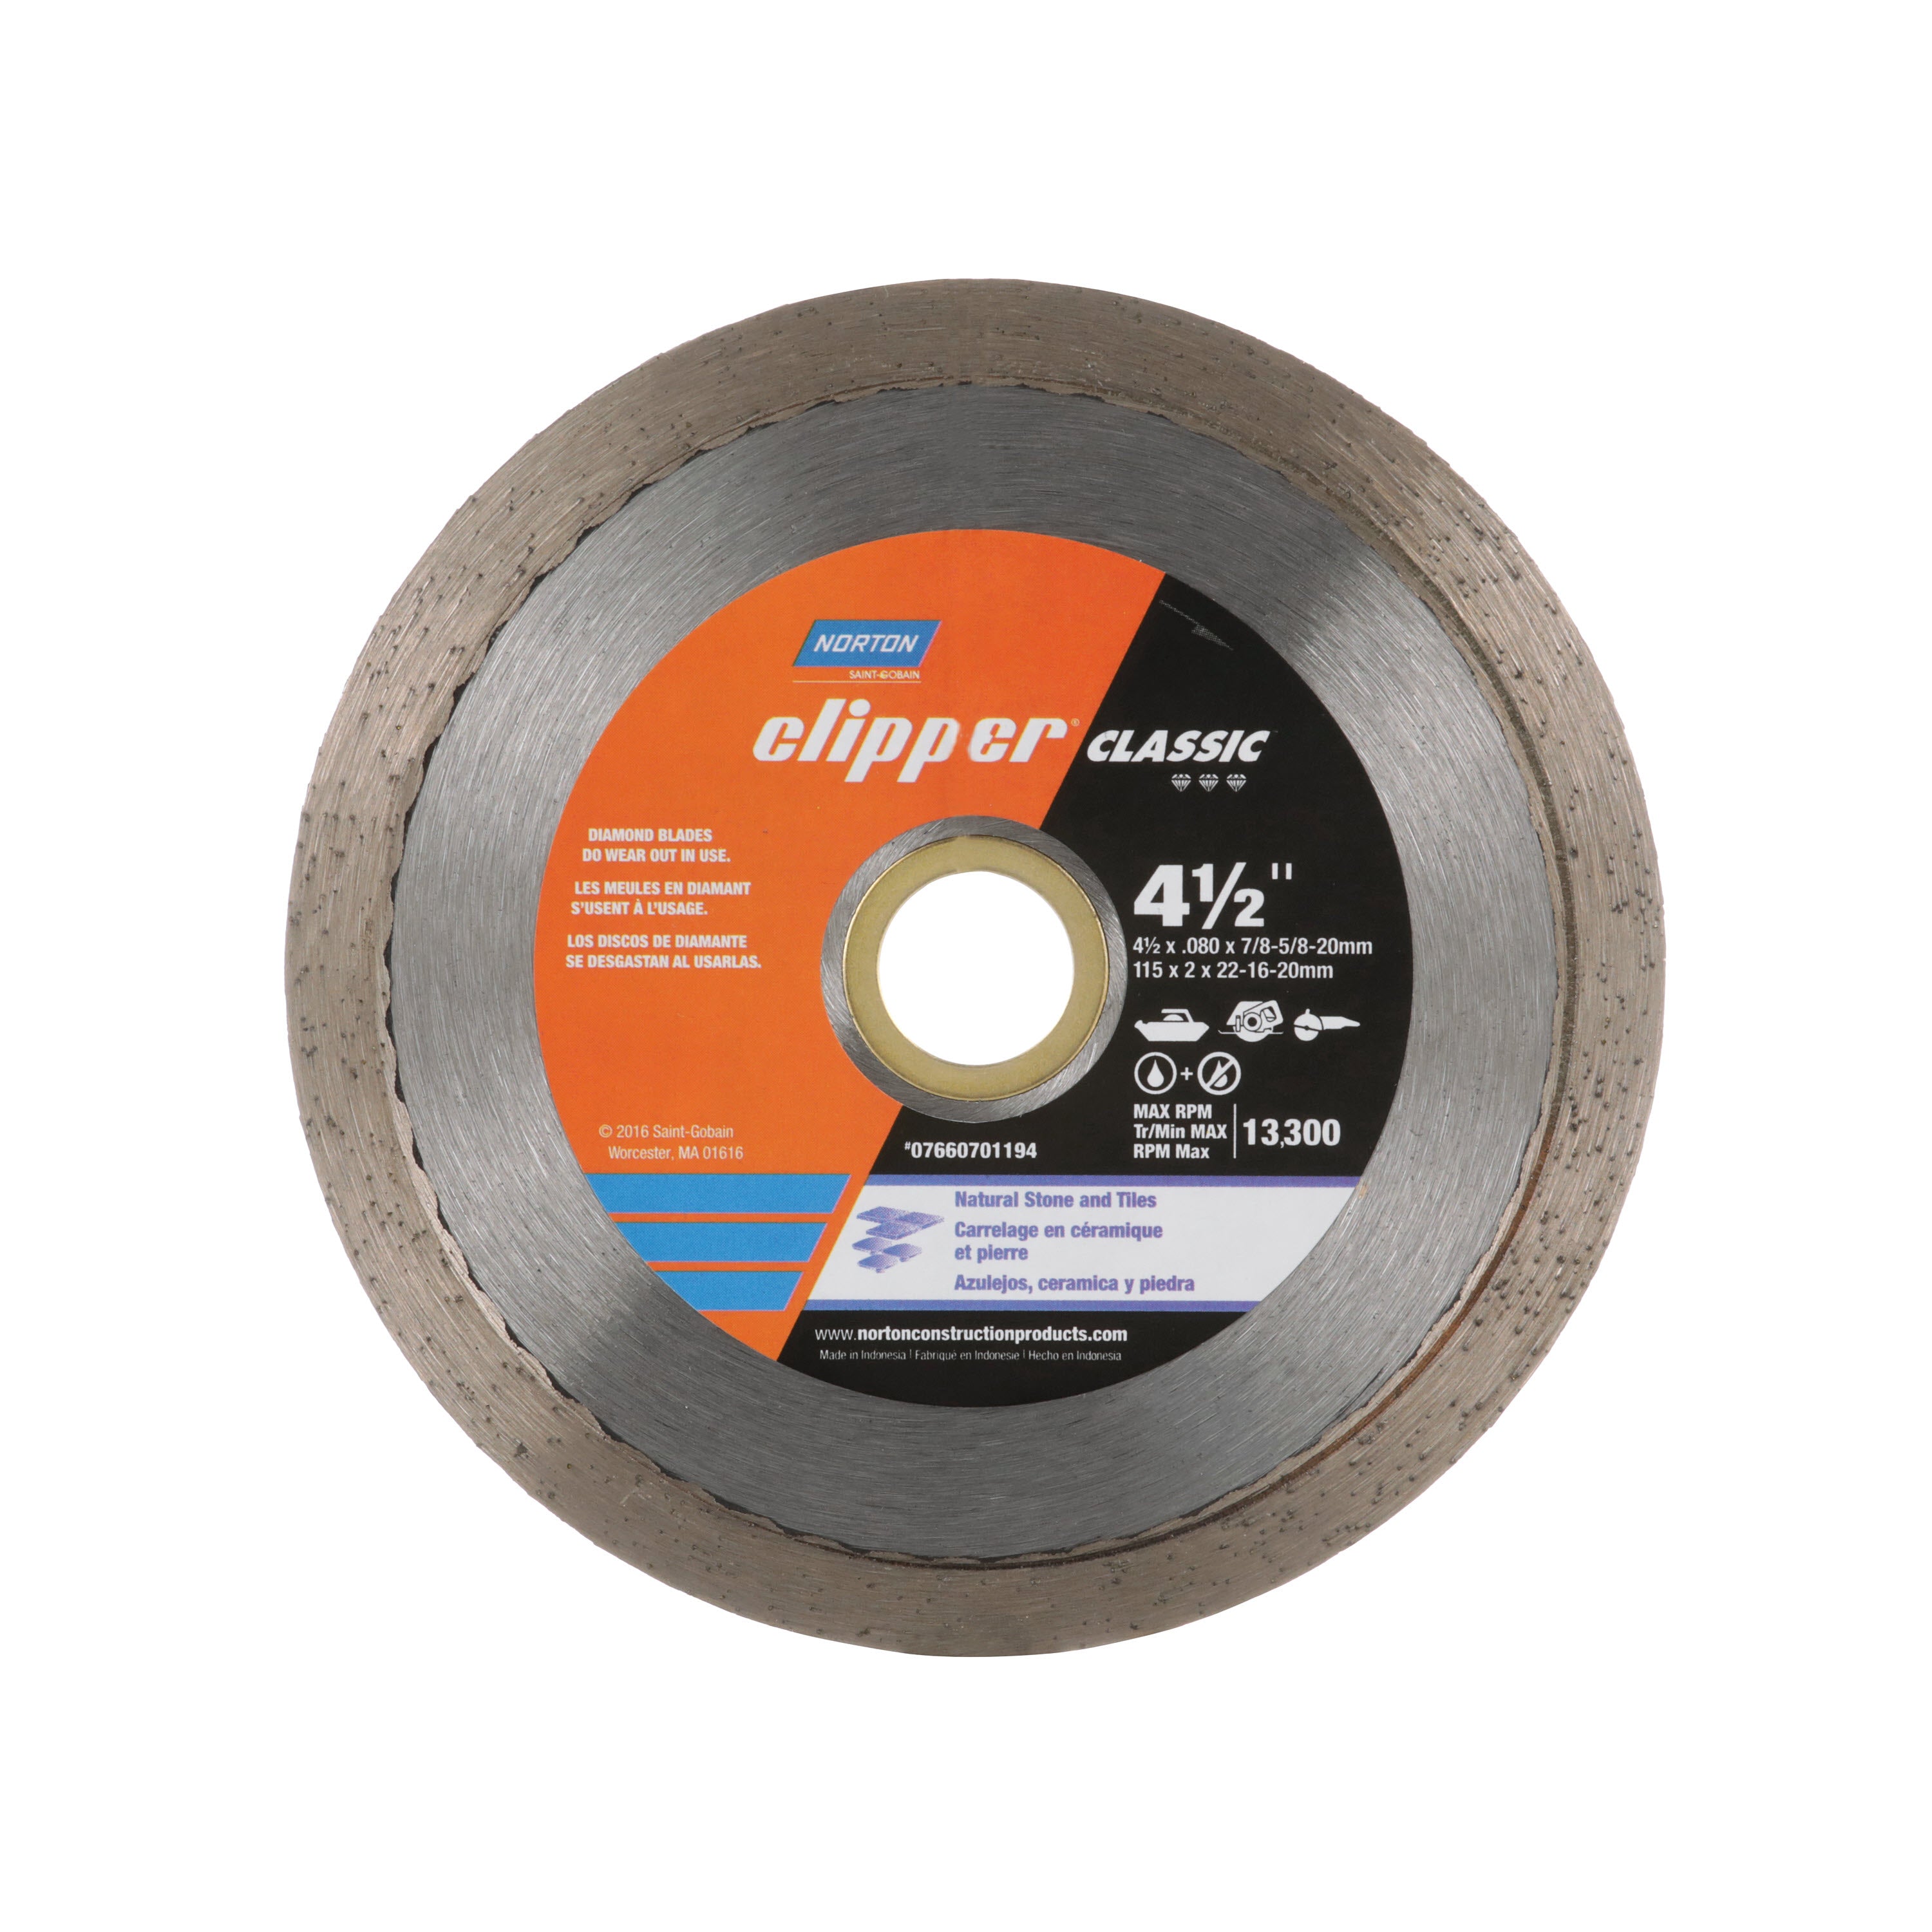 Clipper Classic 7in Natural Stone Dry Continuous Rim Tile Blade